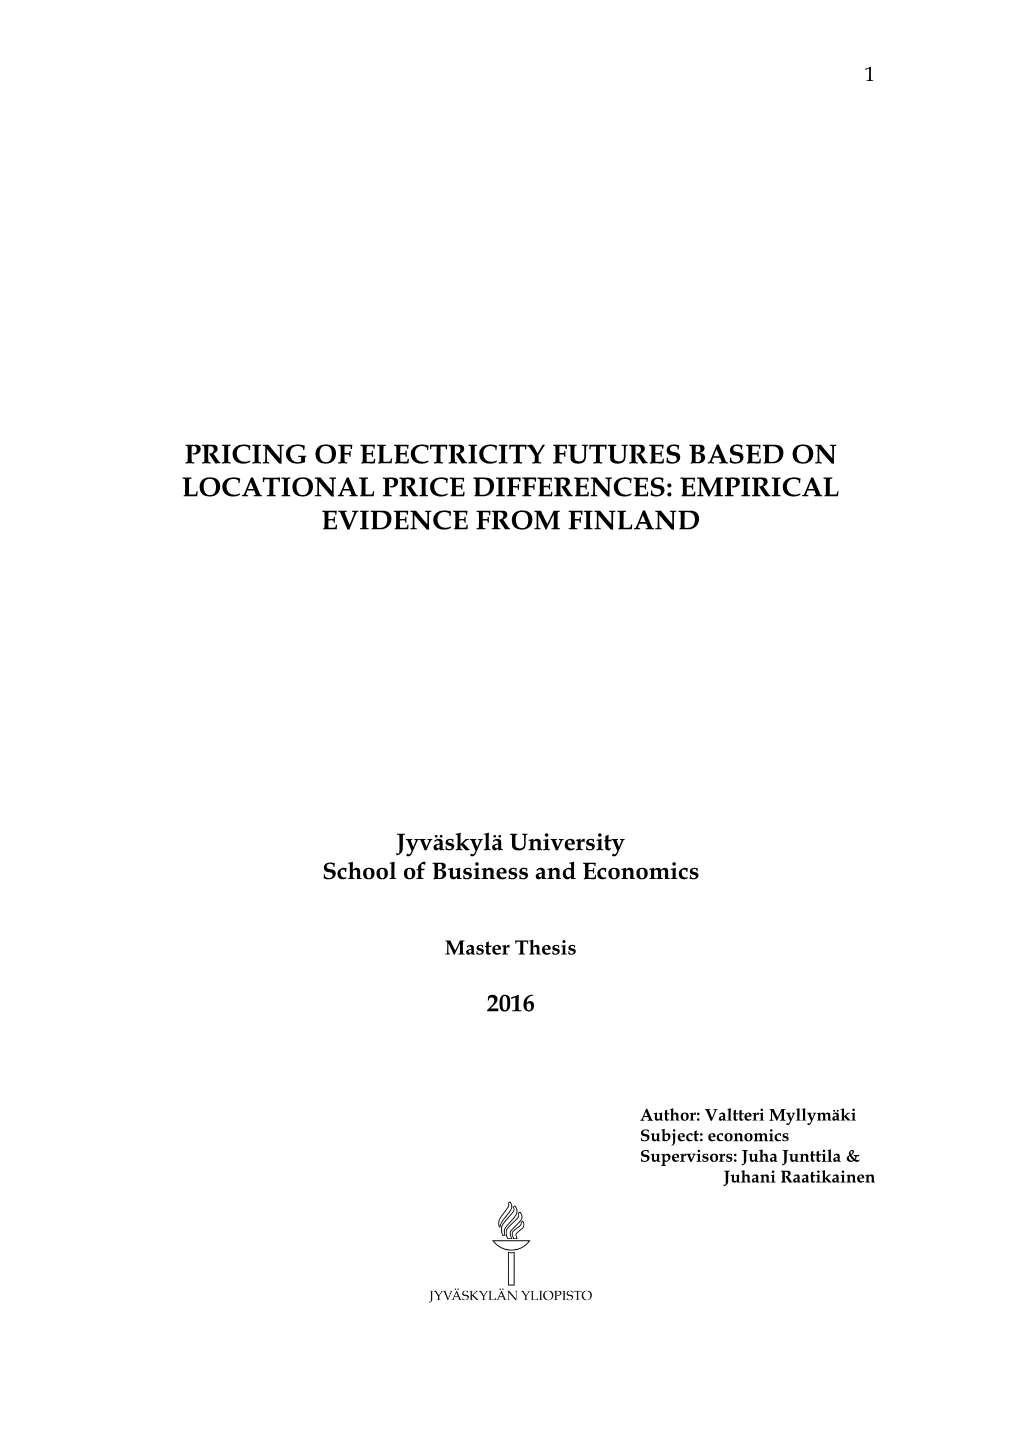 Pricing of Electricity Futures Based on Locational Price Differences: Empirical Evidence from Finland